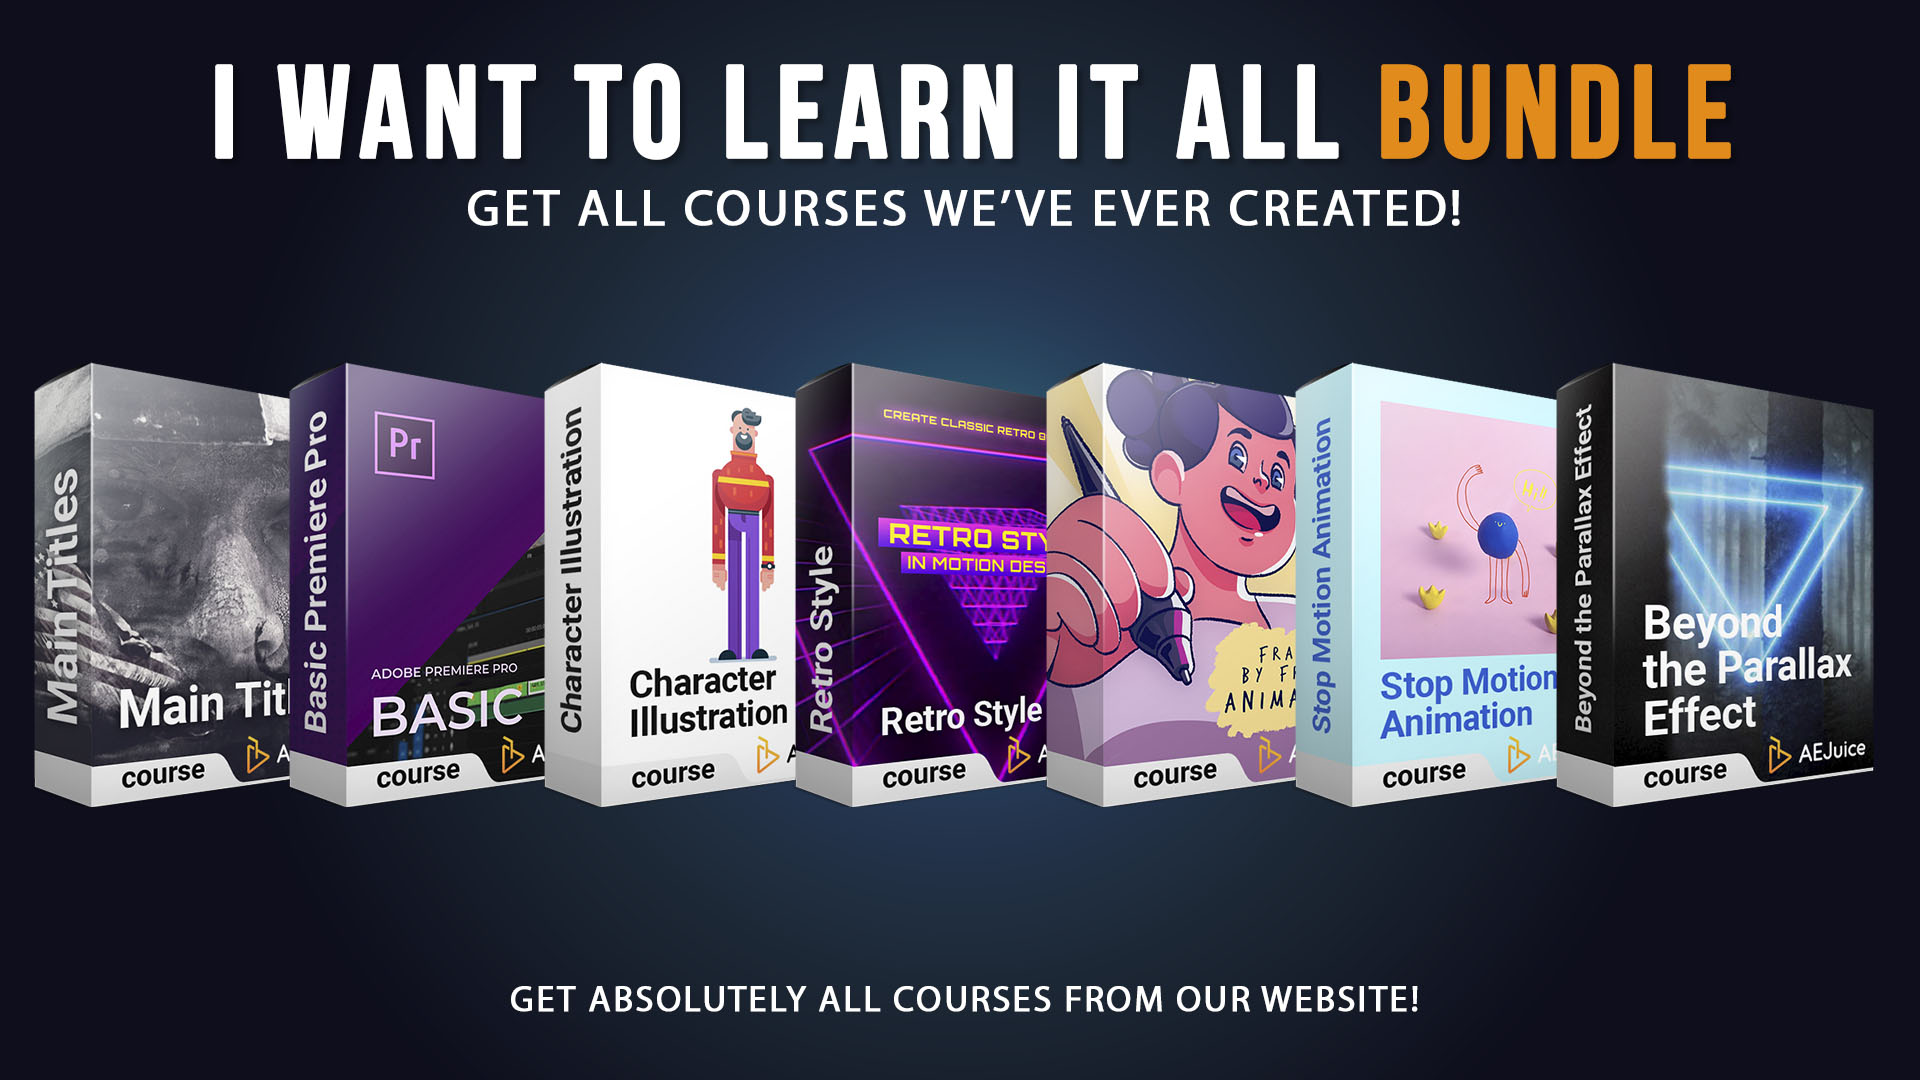 I Want To Learn It All Bundle[AEJuice]